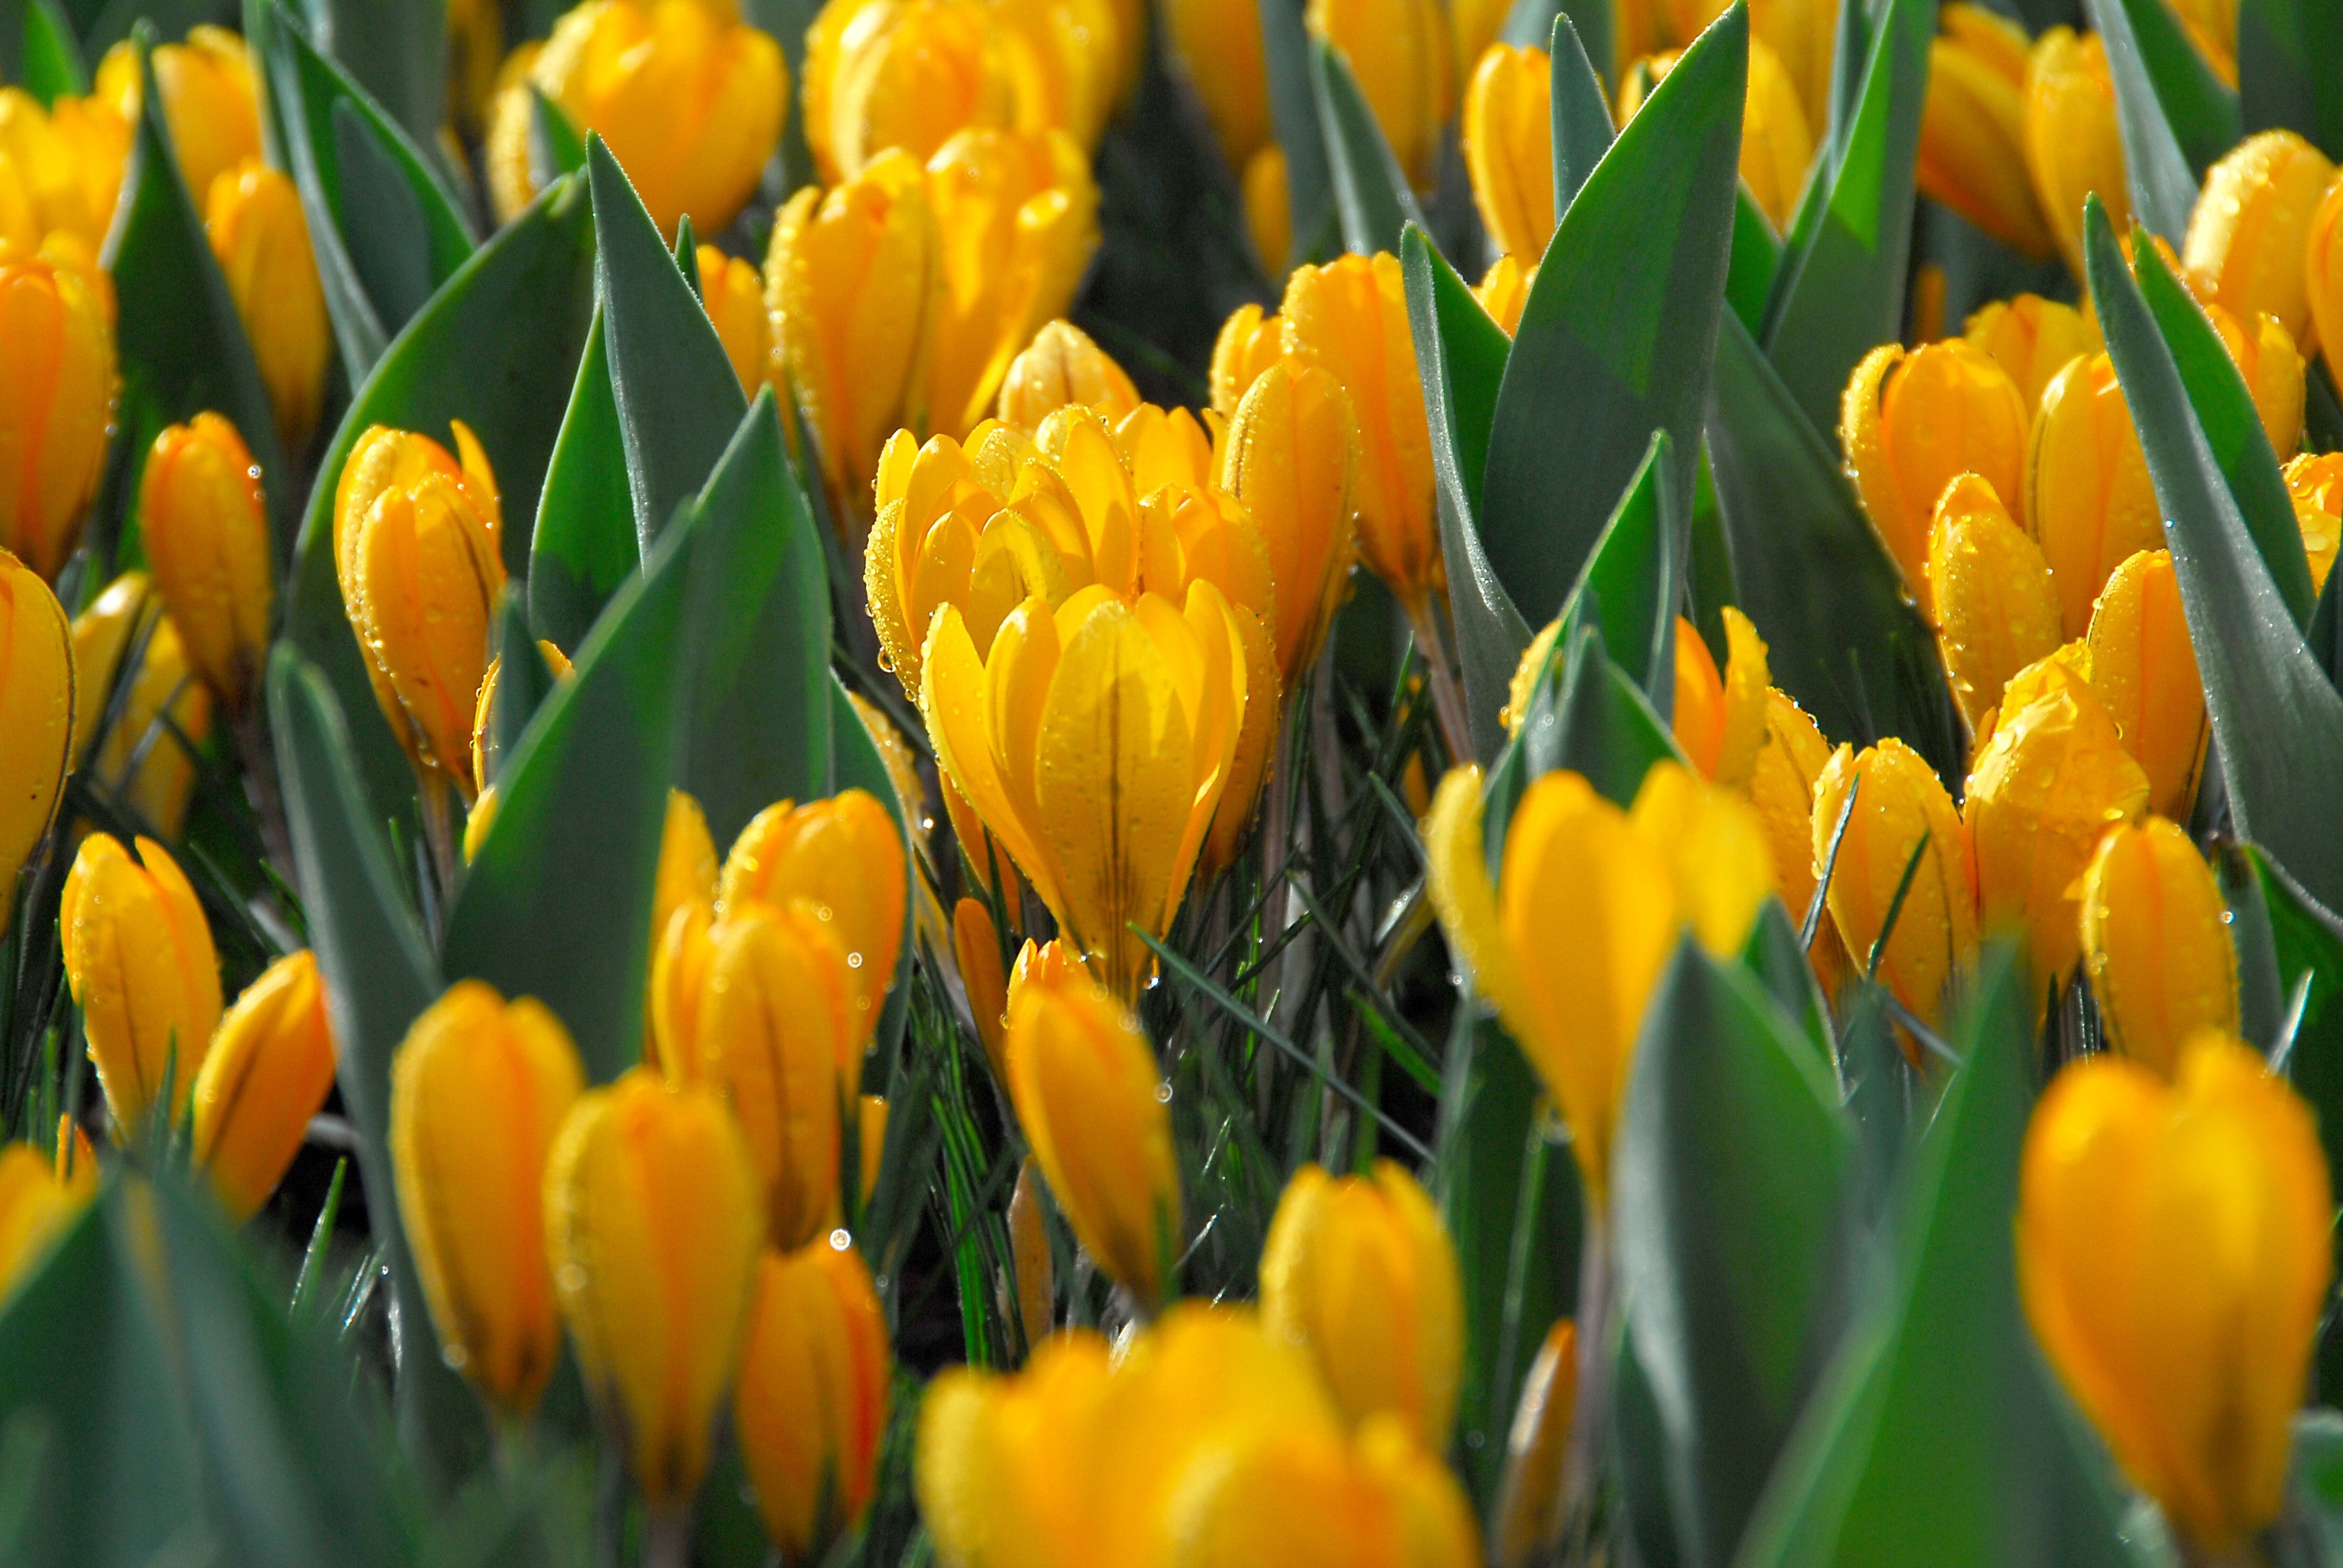 Group of Crocus Yellow Mammoth, with golden-yellow flowers and green foliage